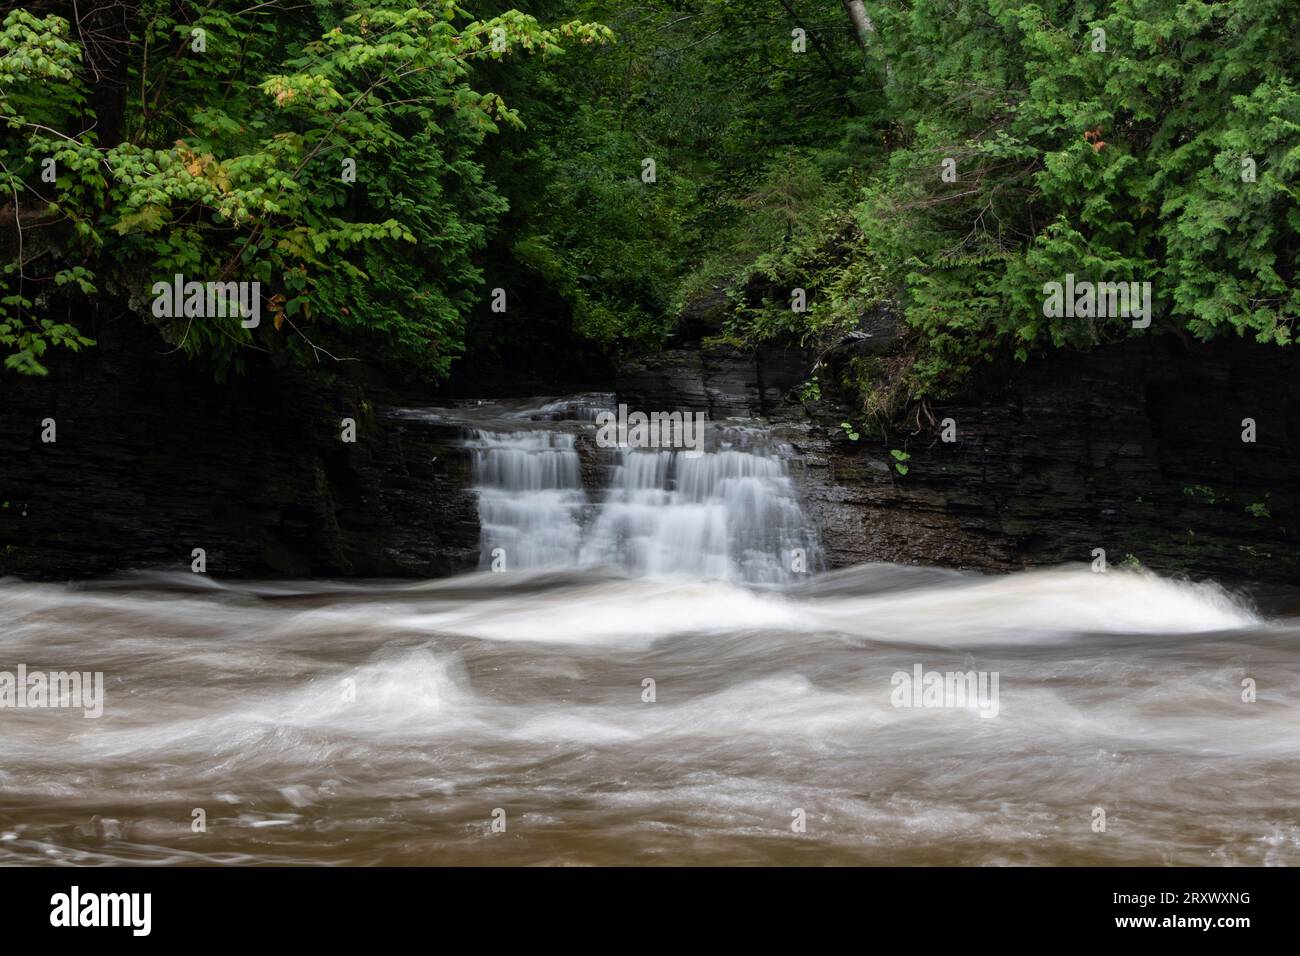 Small waterfall and St. Charles creek in Parc Chauveau using long exposure Stock Photo